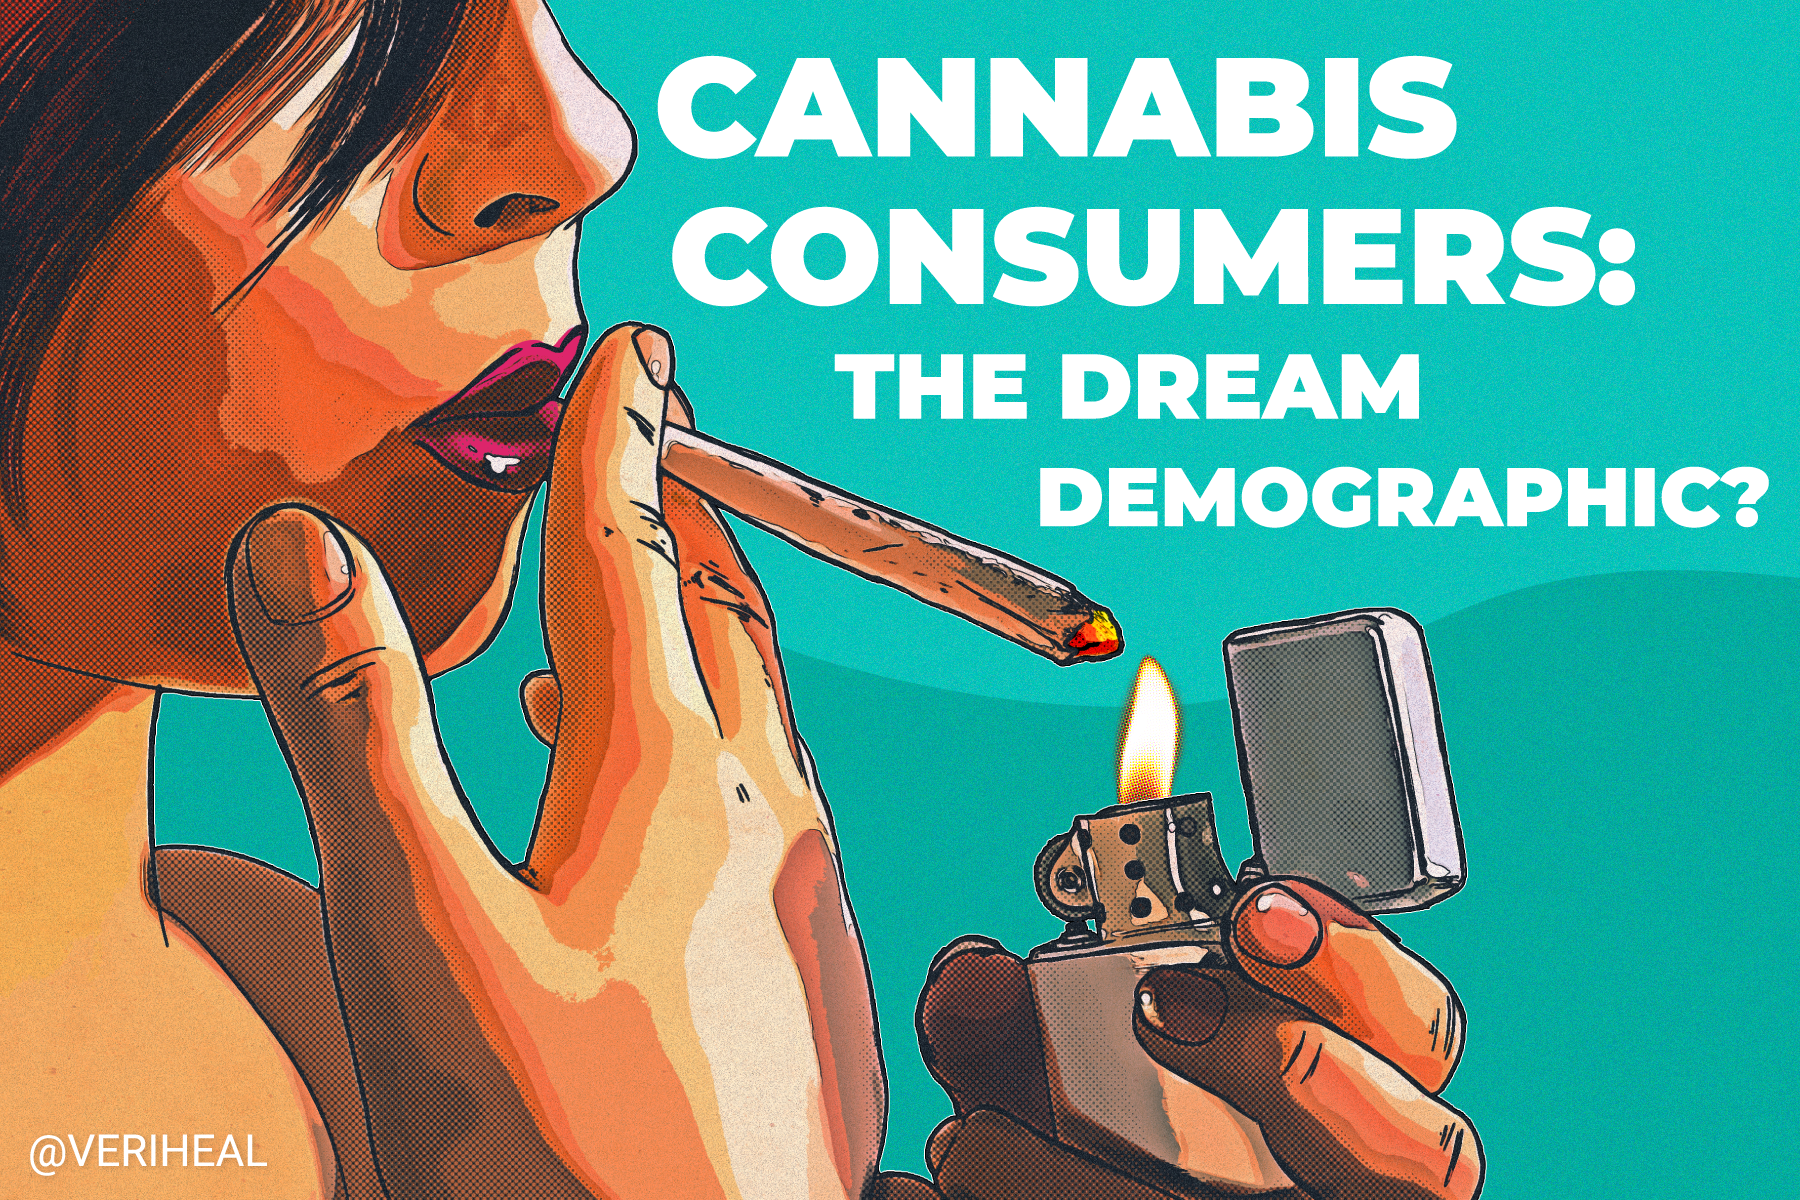 Cannabis Consumers: The Dream Demographic?